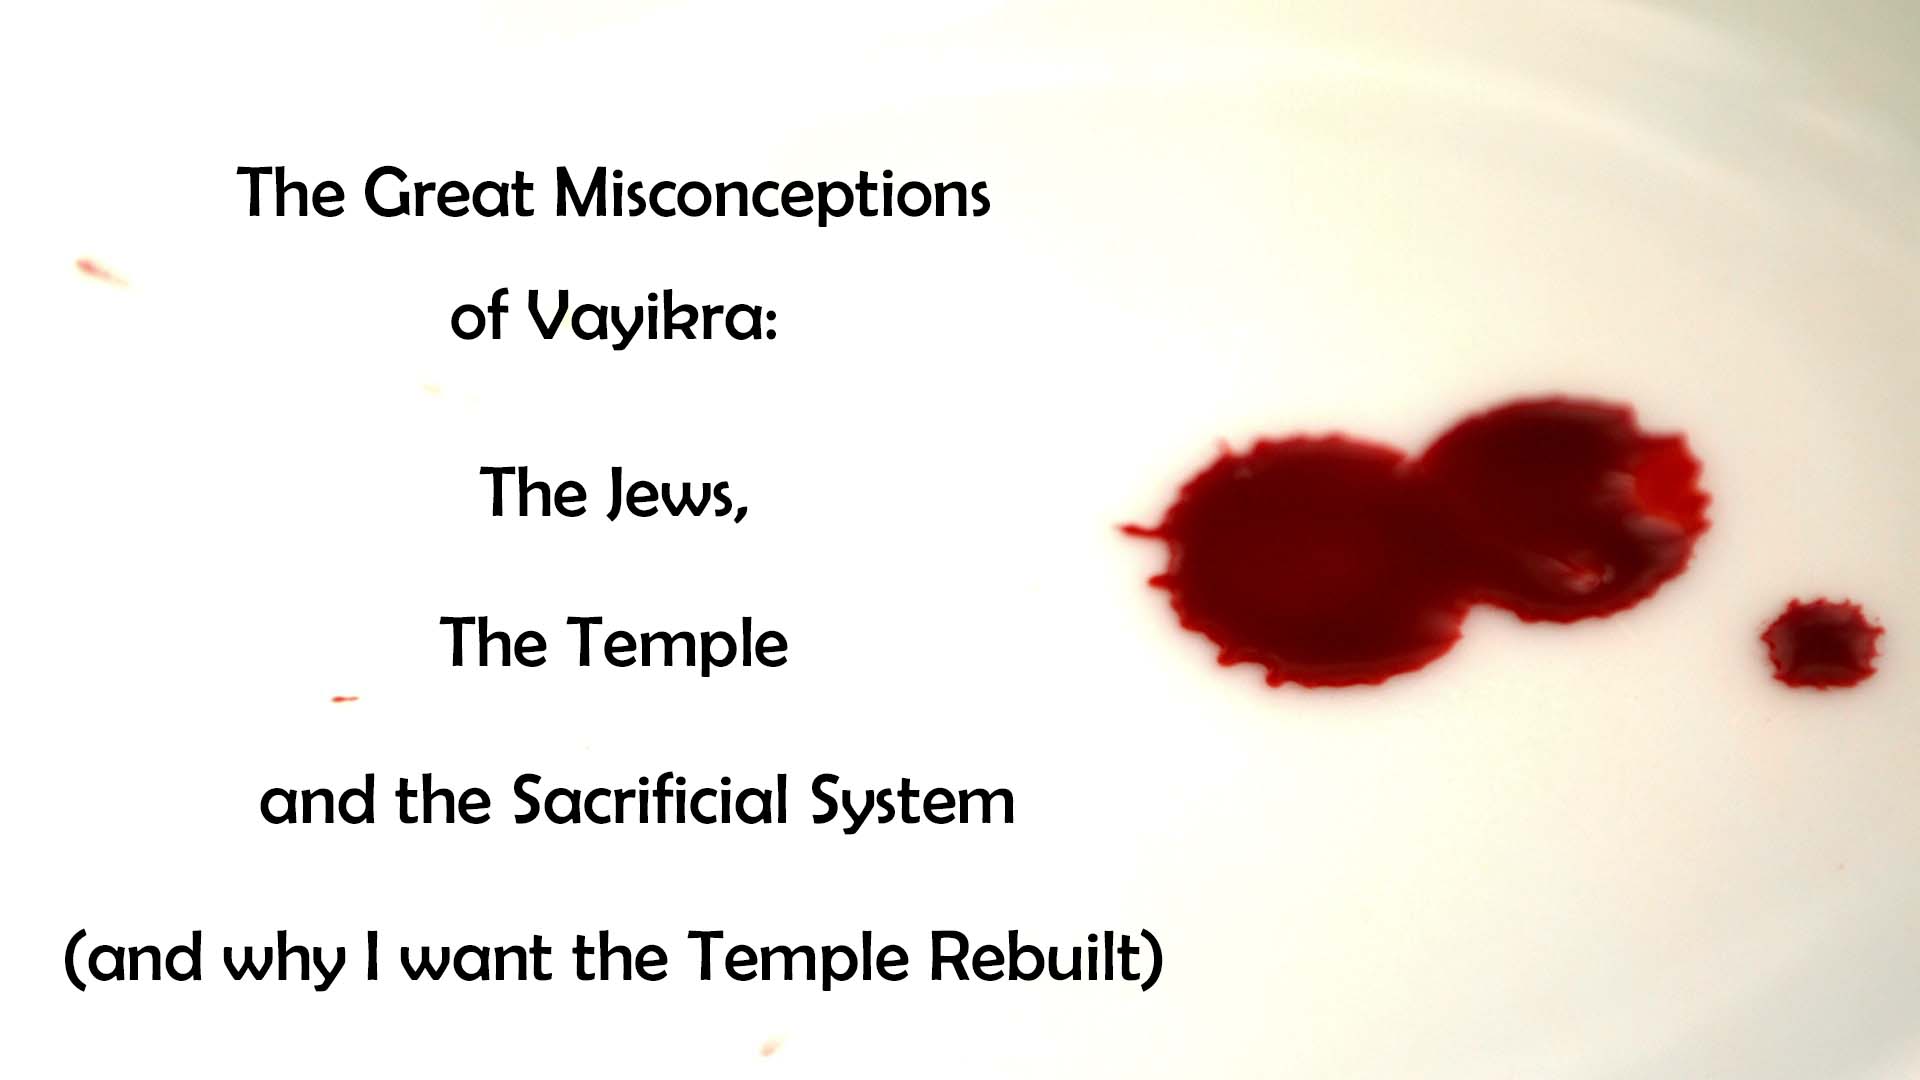 The Great Misconceptions of Vayikra: The Jews, the Temple, and the Sacrificial System